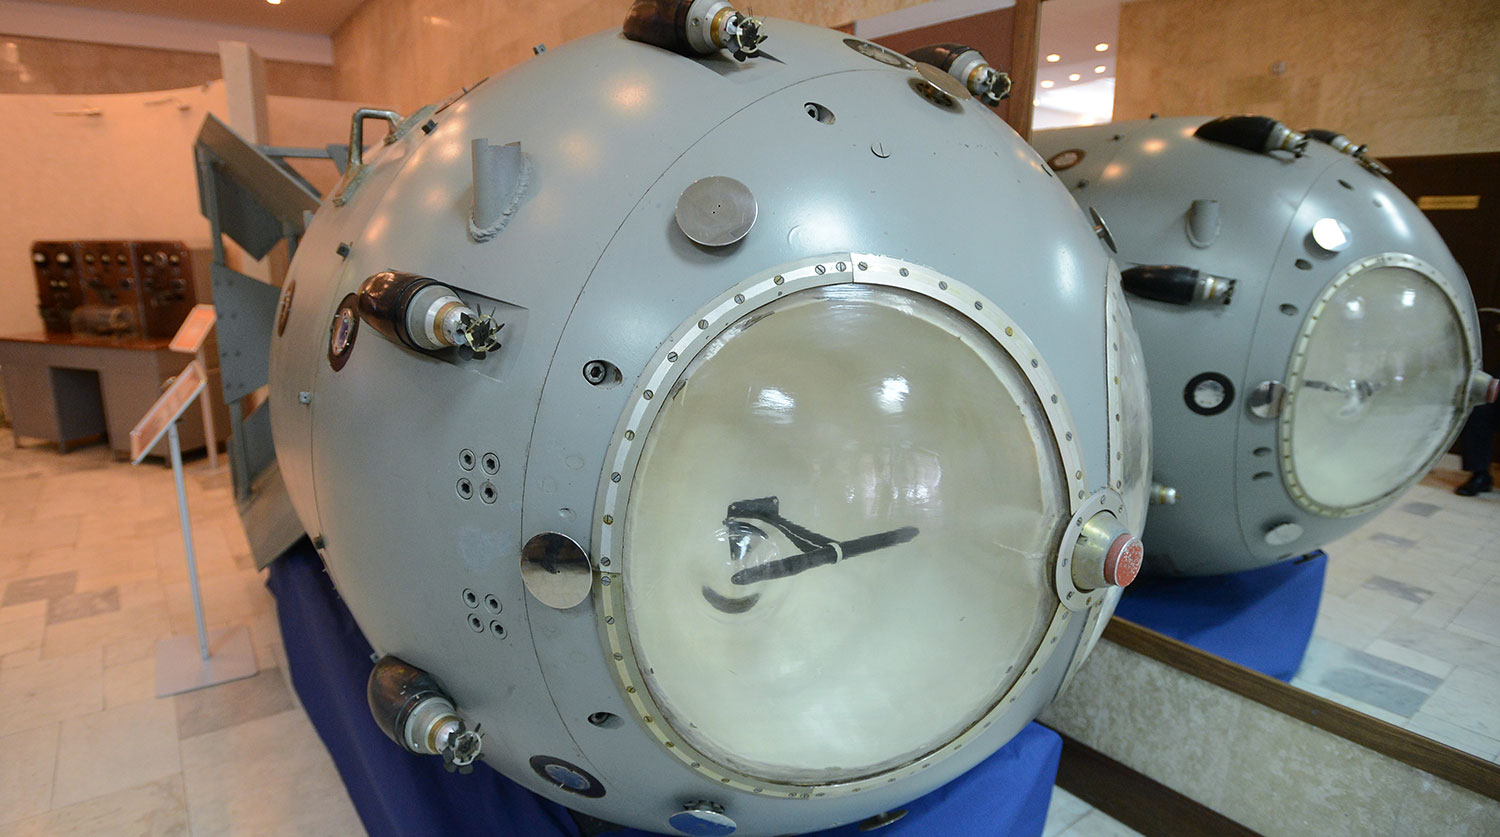 

The first Soviet atomic bomb RDS-1 at the Museum of the Russian Federal Nuclear Center

